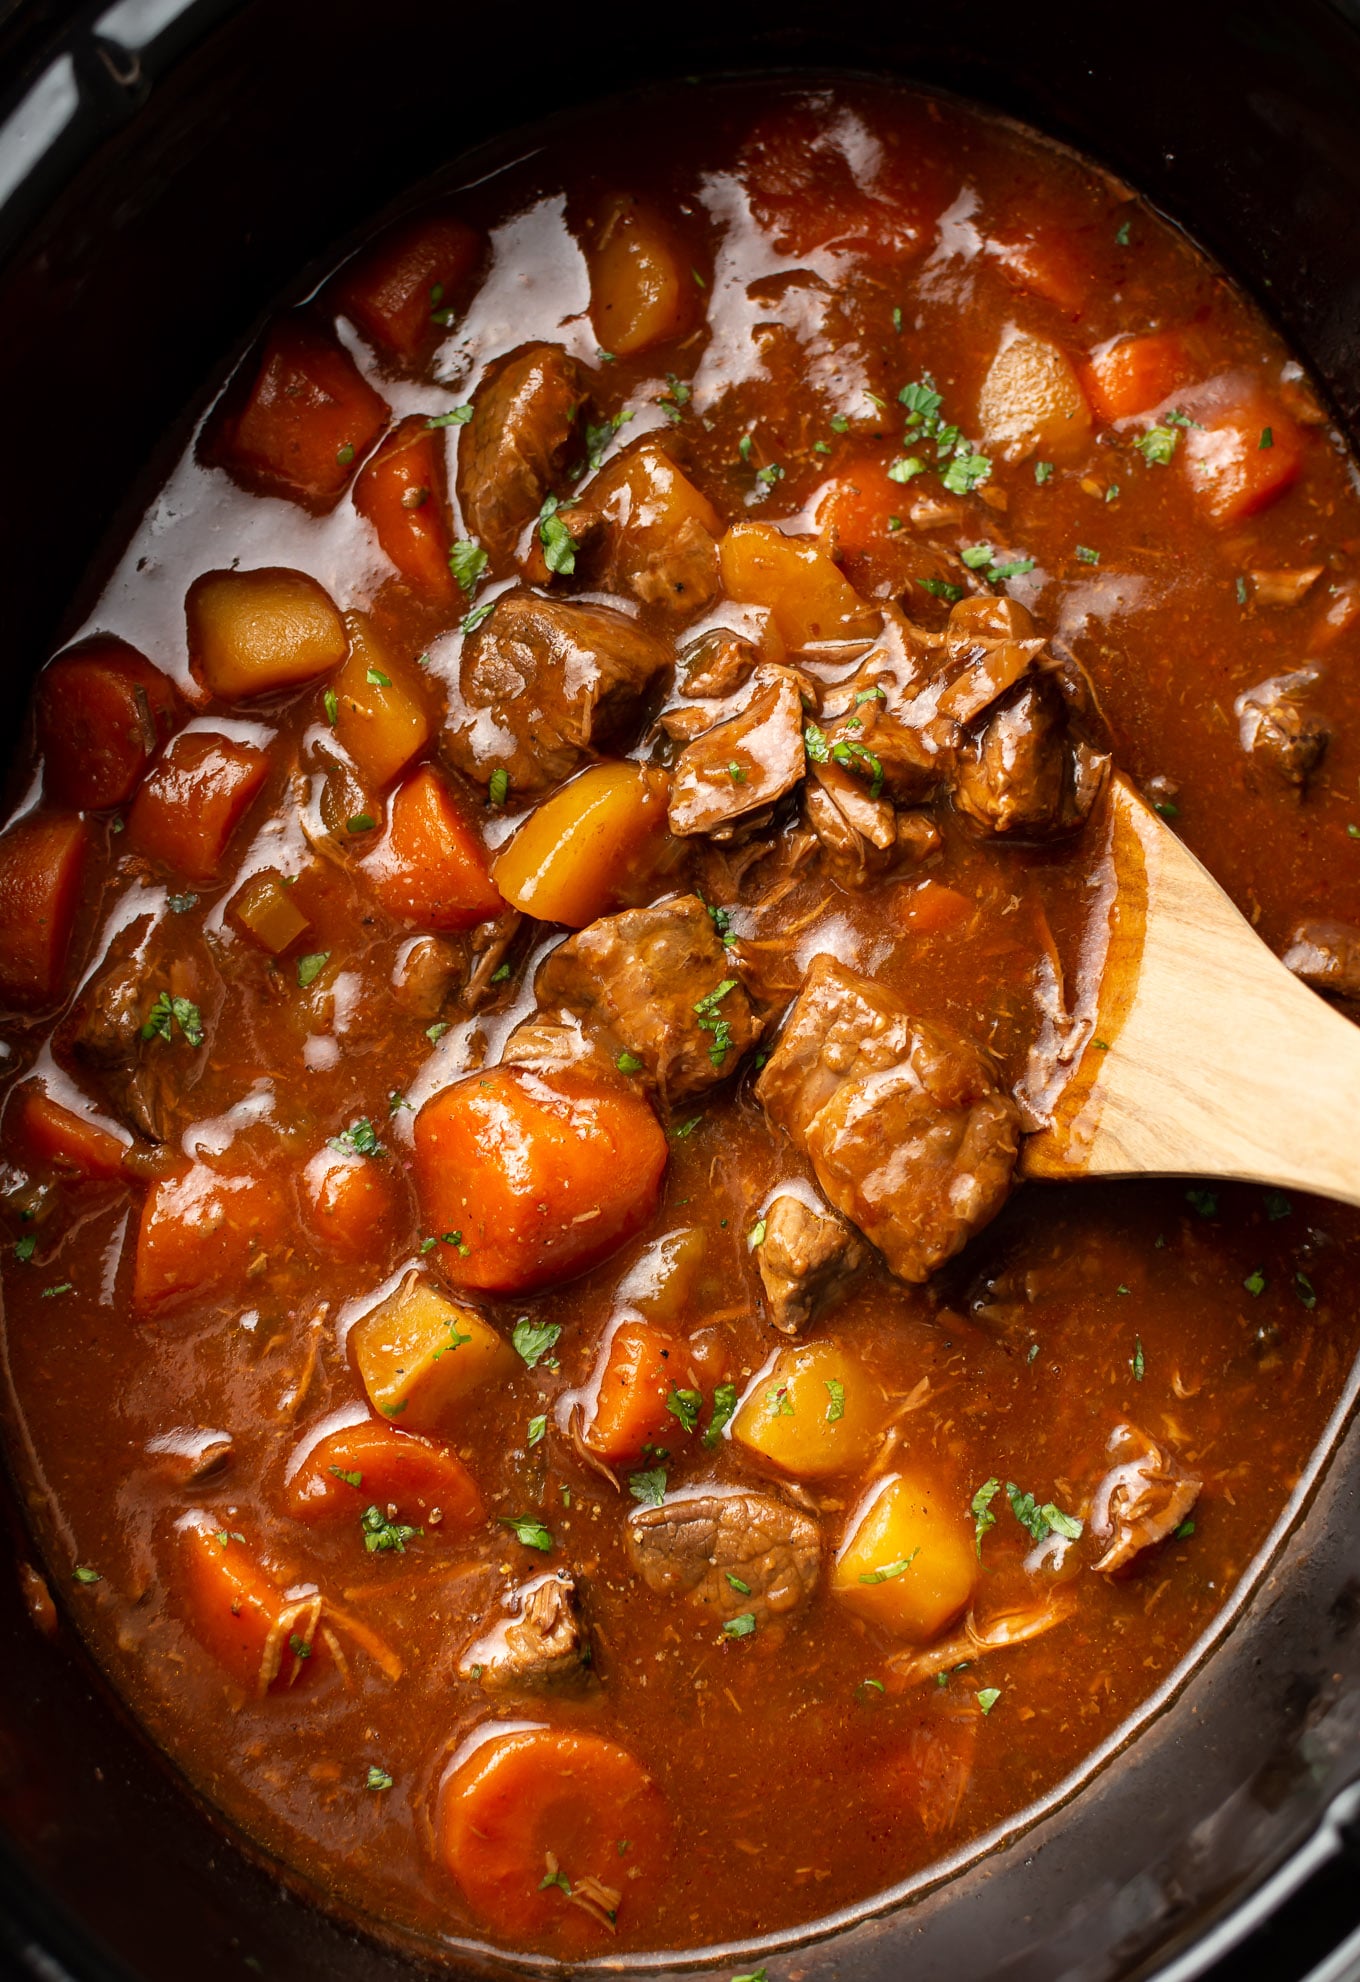 The best casserole dishes for delicious soups, stews, and pot roasts